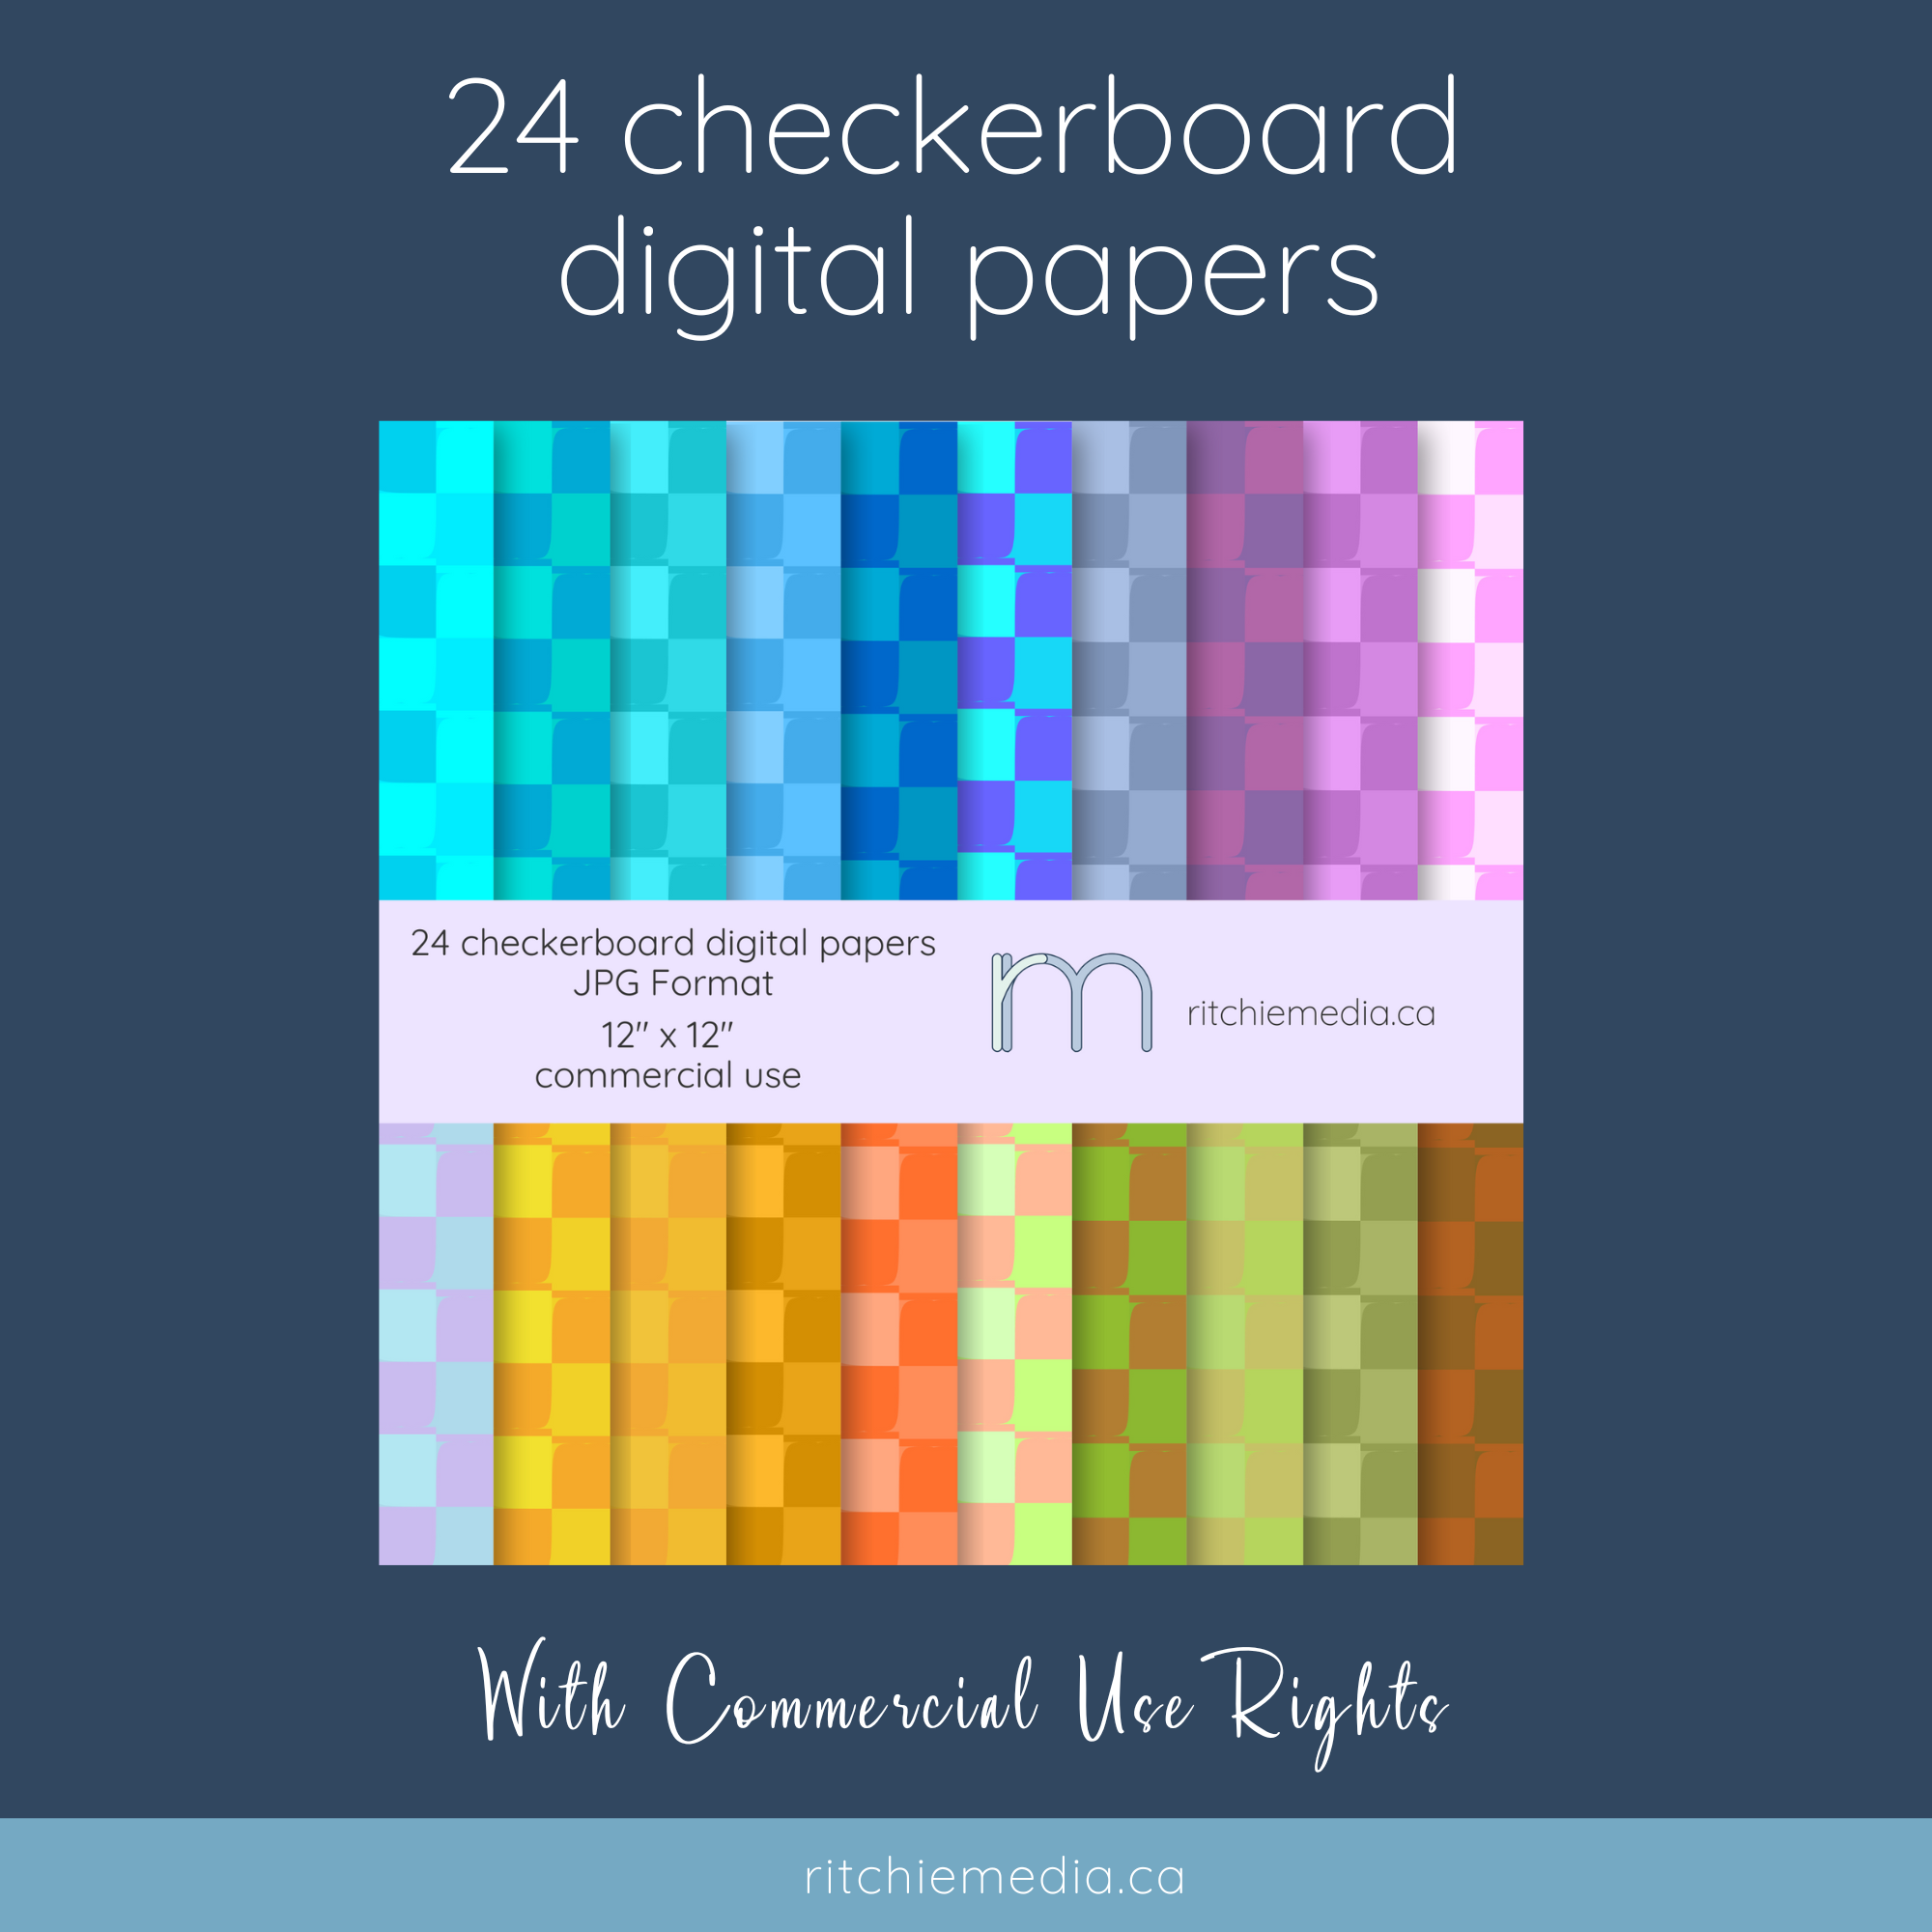 24 checkerboard digital papers promo